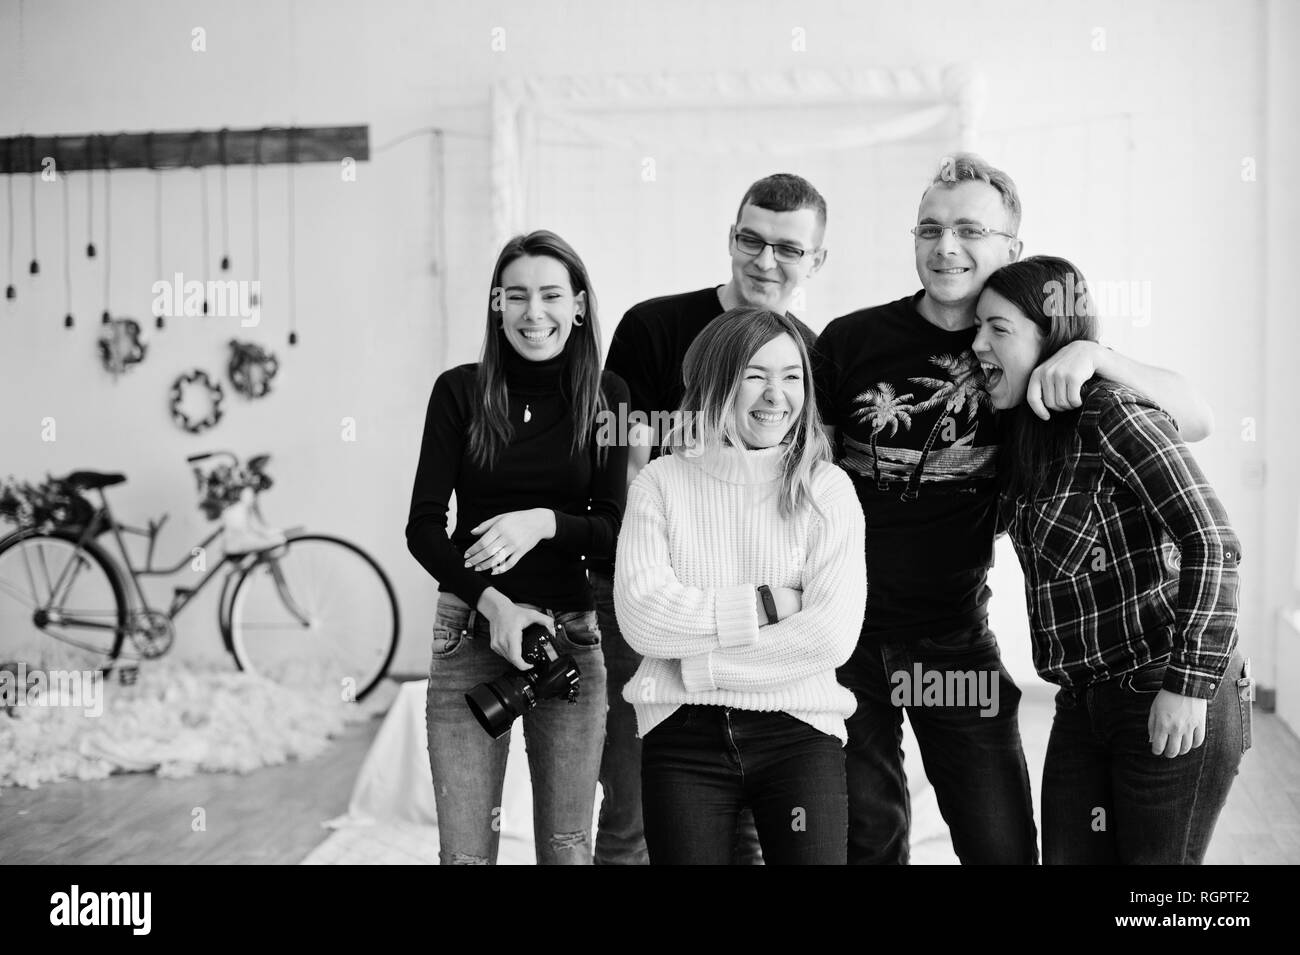 Group of five peoples, friends photographers and designers on studio shooting after hard work day. They happy and laughing. Stock Photo